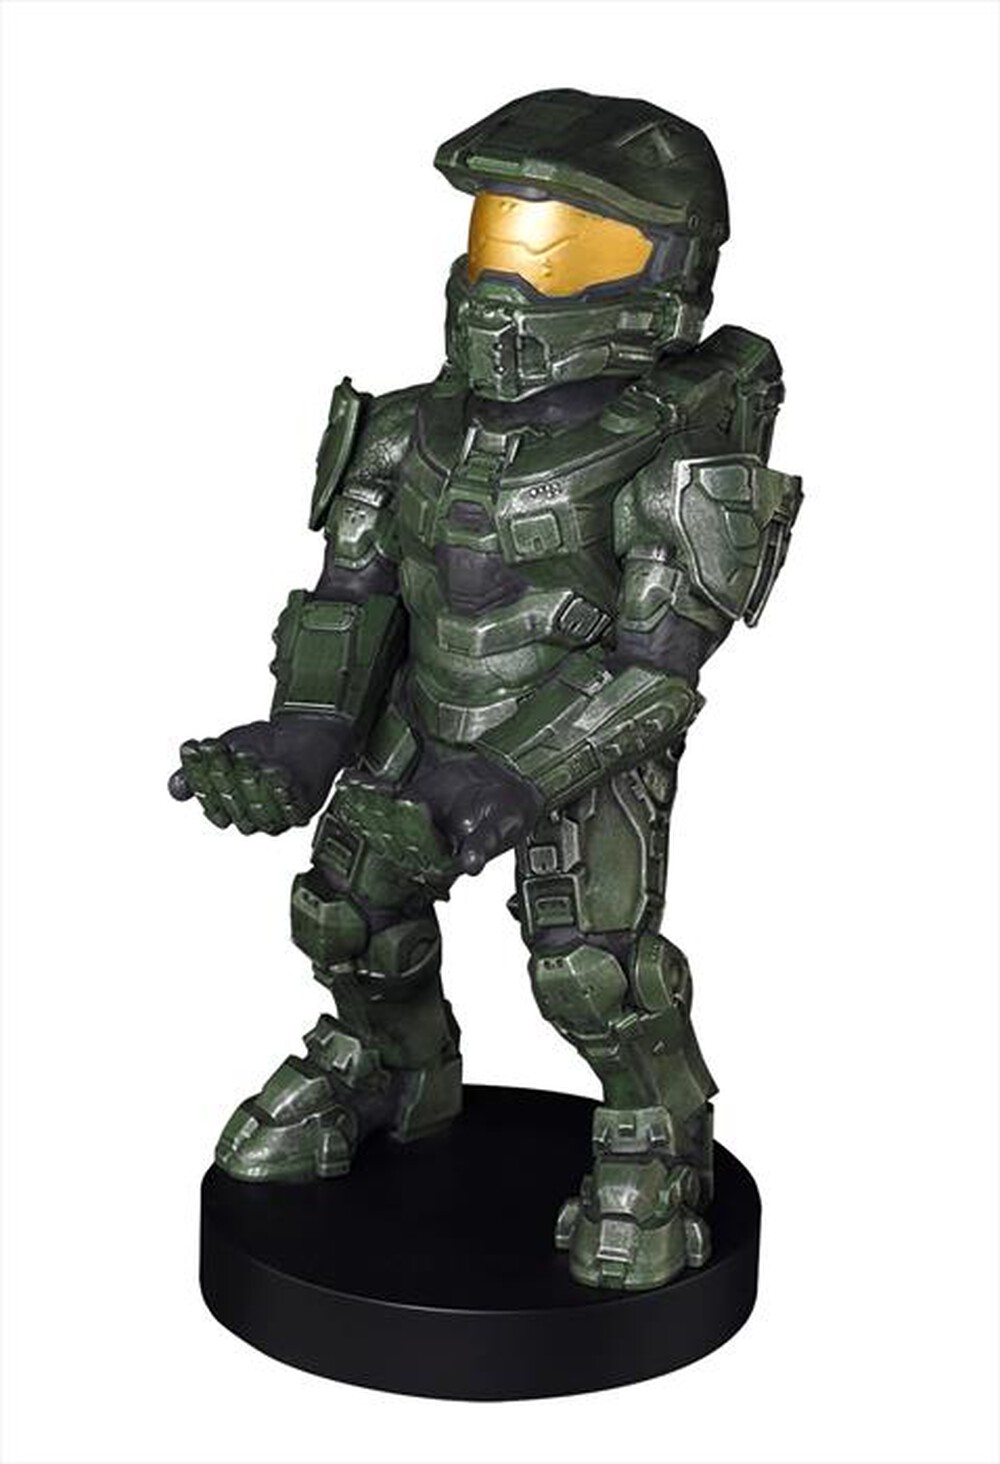 "EXQUISITE GAMING - MASTER CHIEF CABLE GUY"